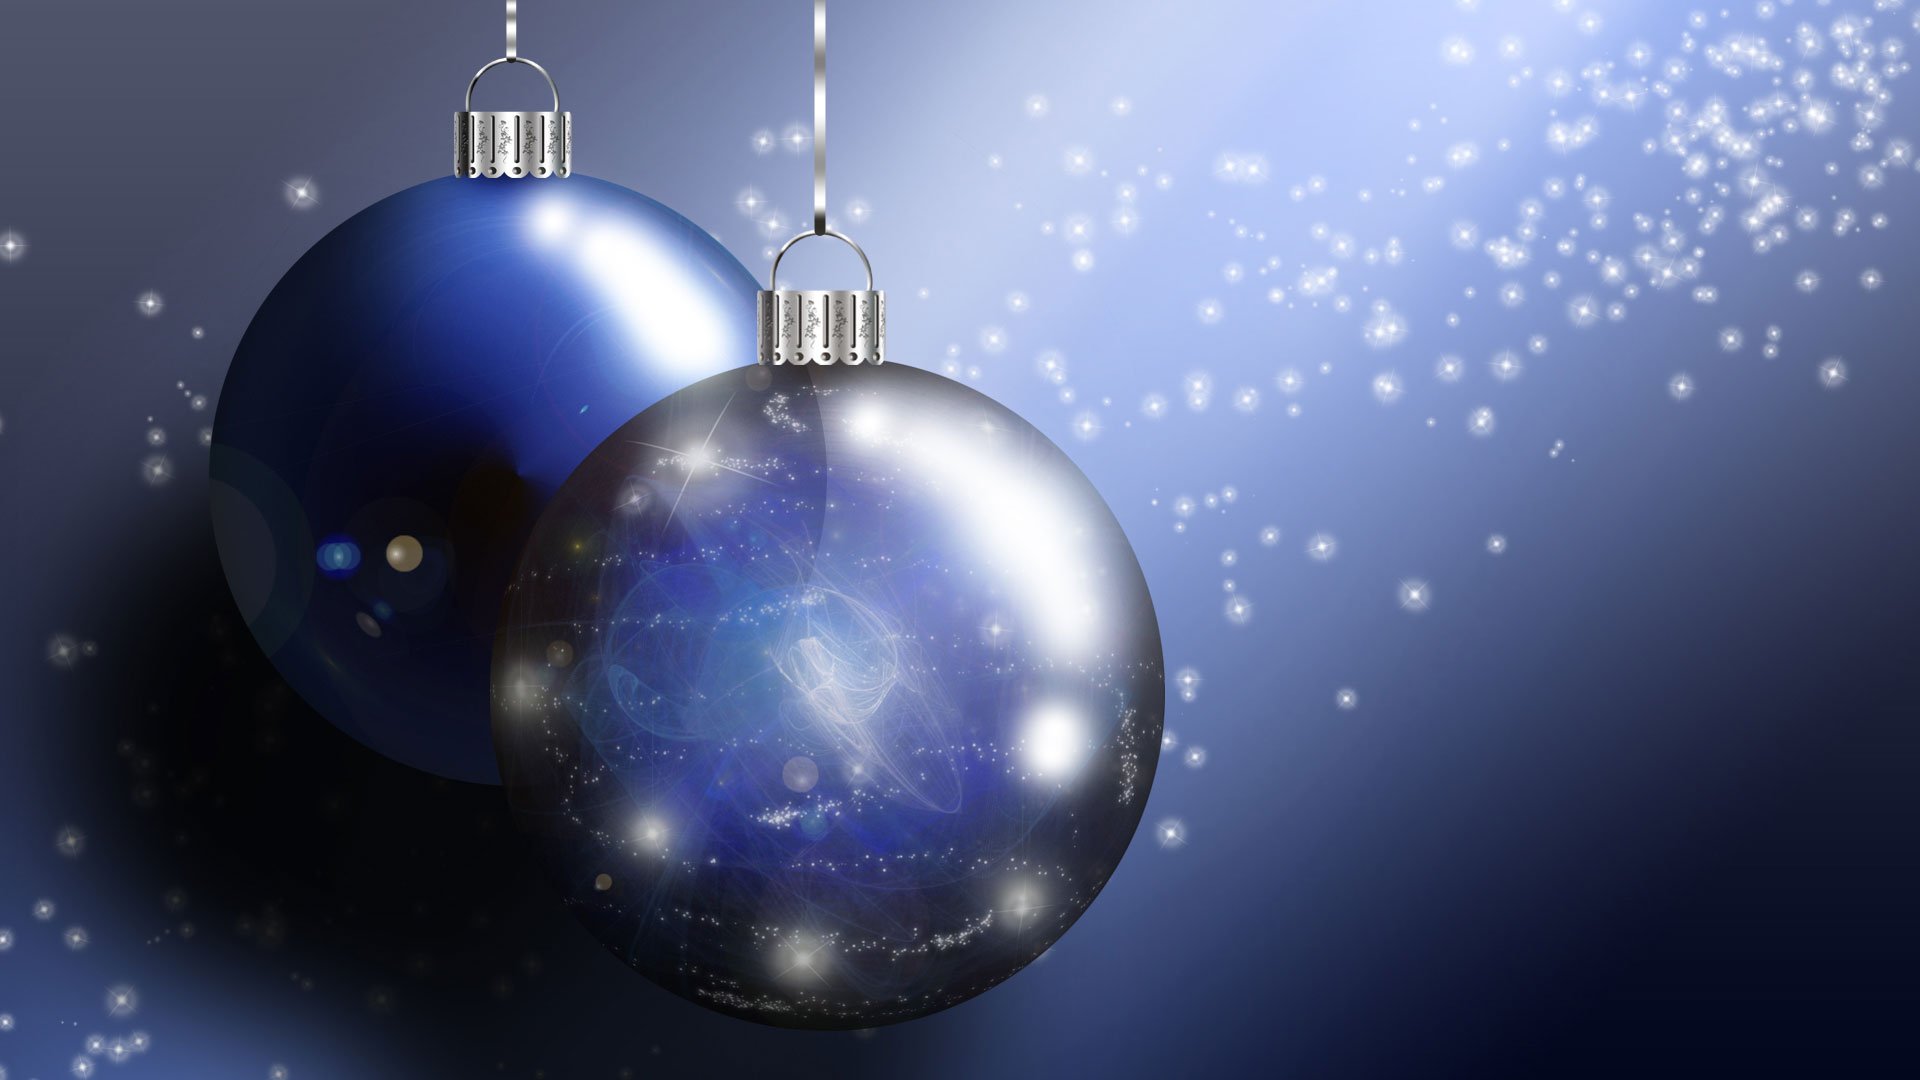 Christmas Ornament Backgrounds